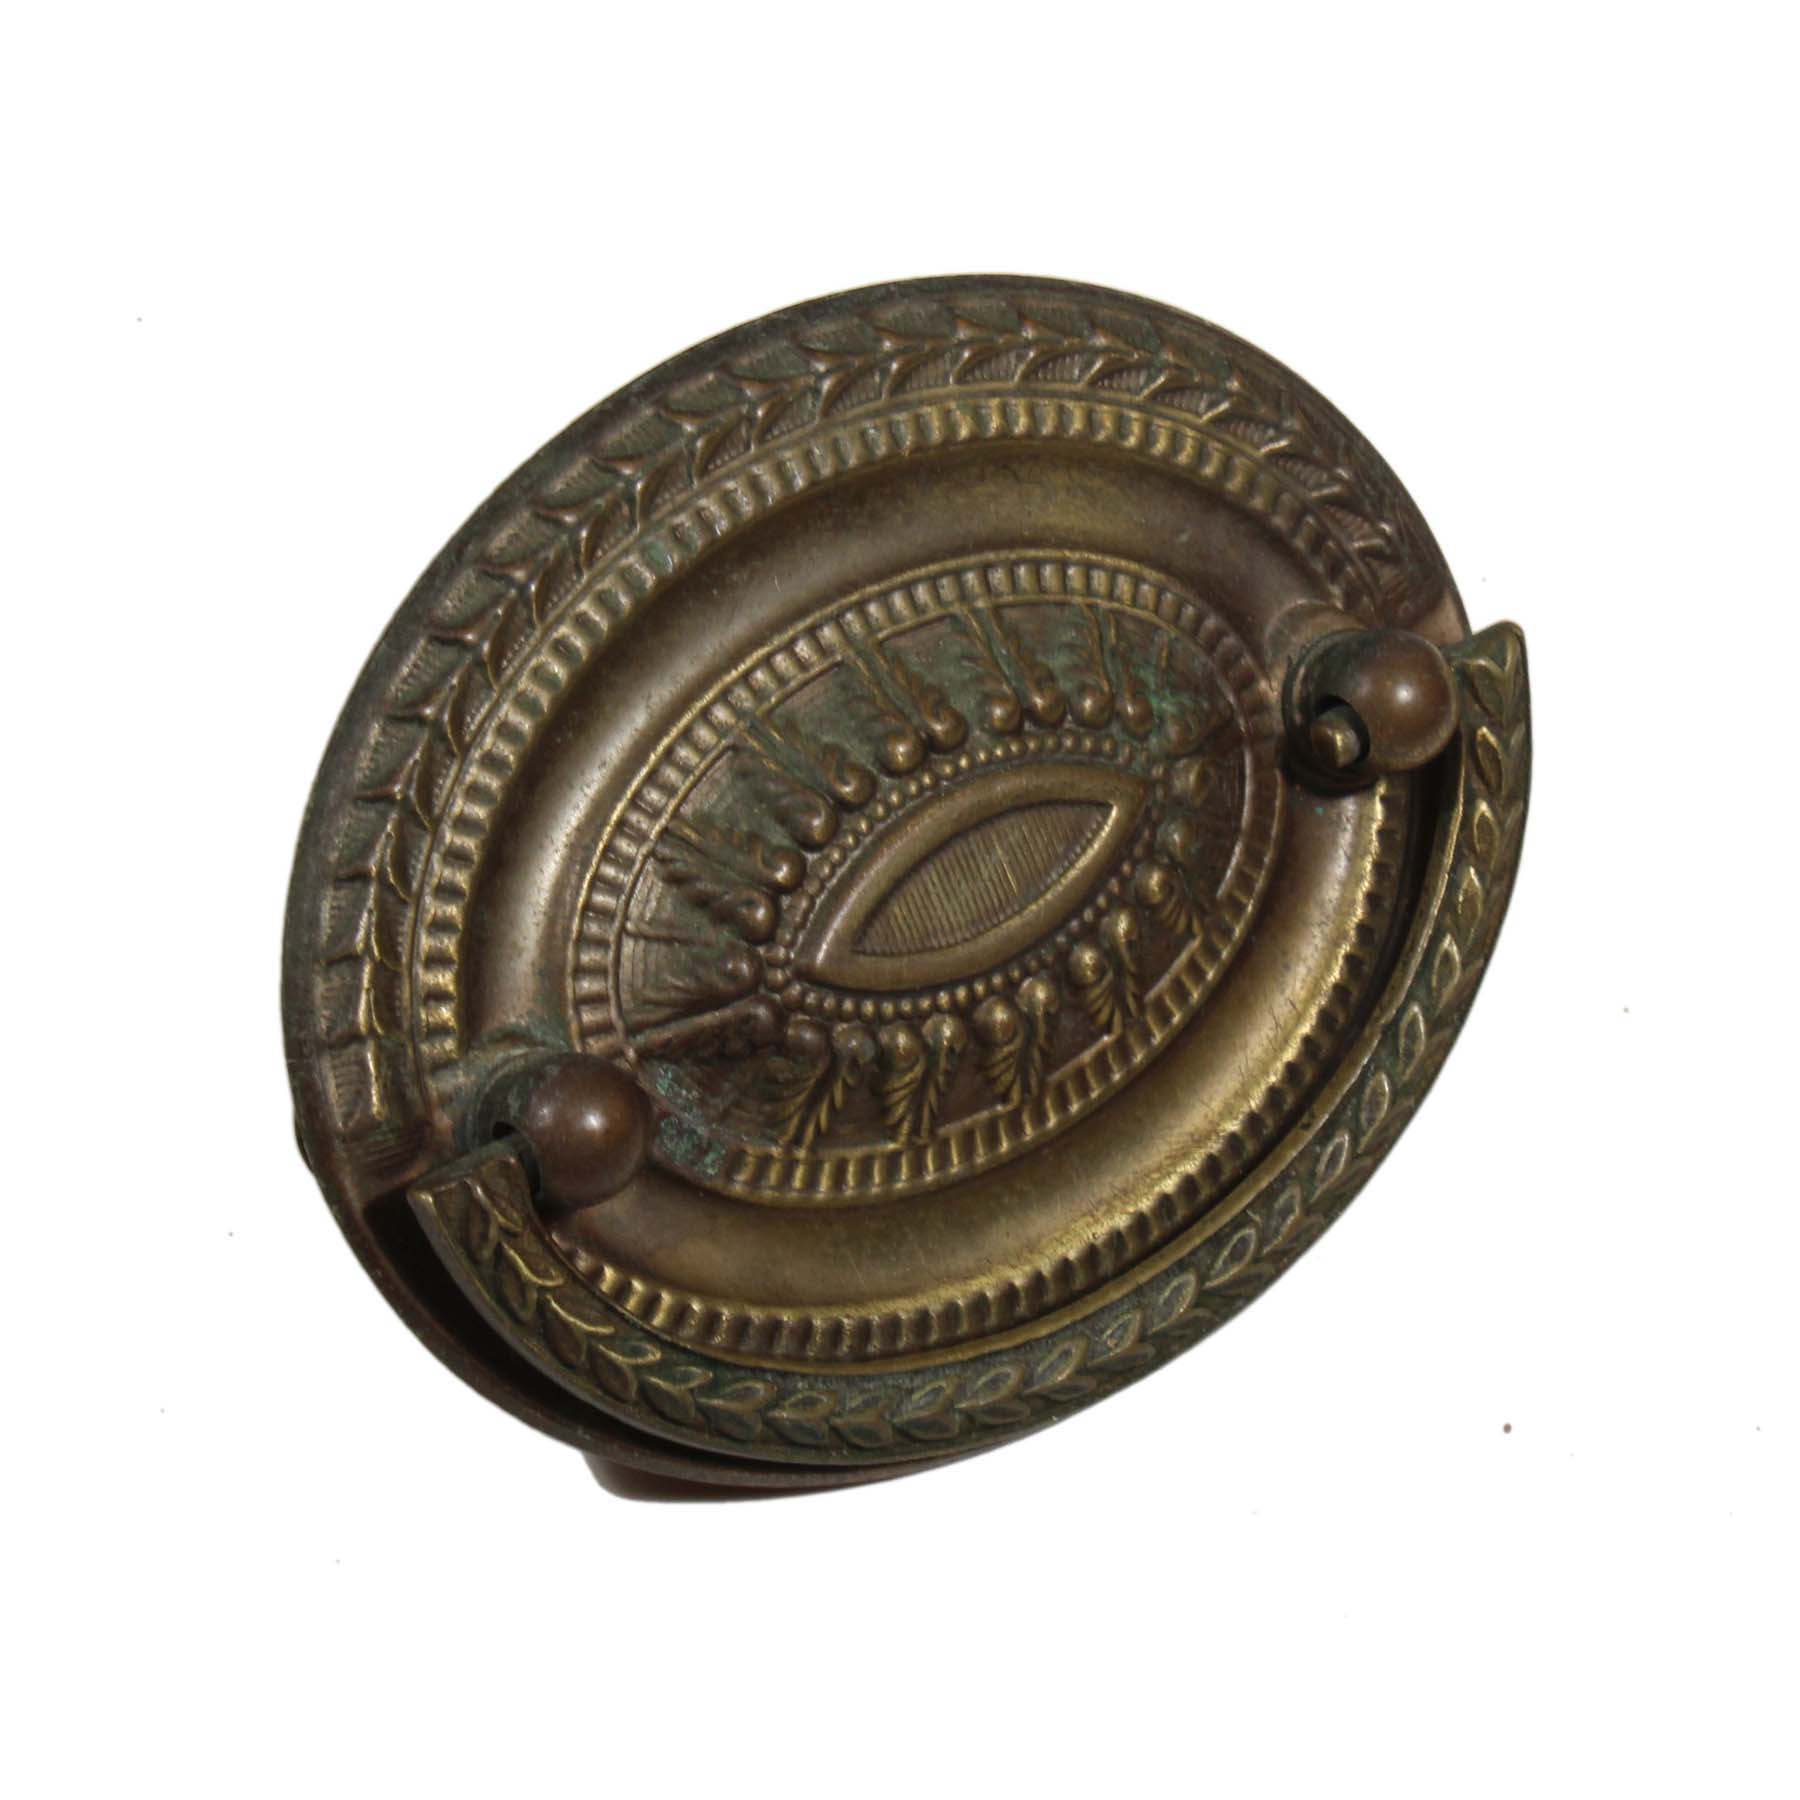 SOLD Antique Brass Drop Ring Cabinetry Pulls, “Heppelwhite”-69712